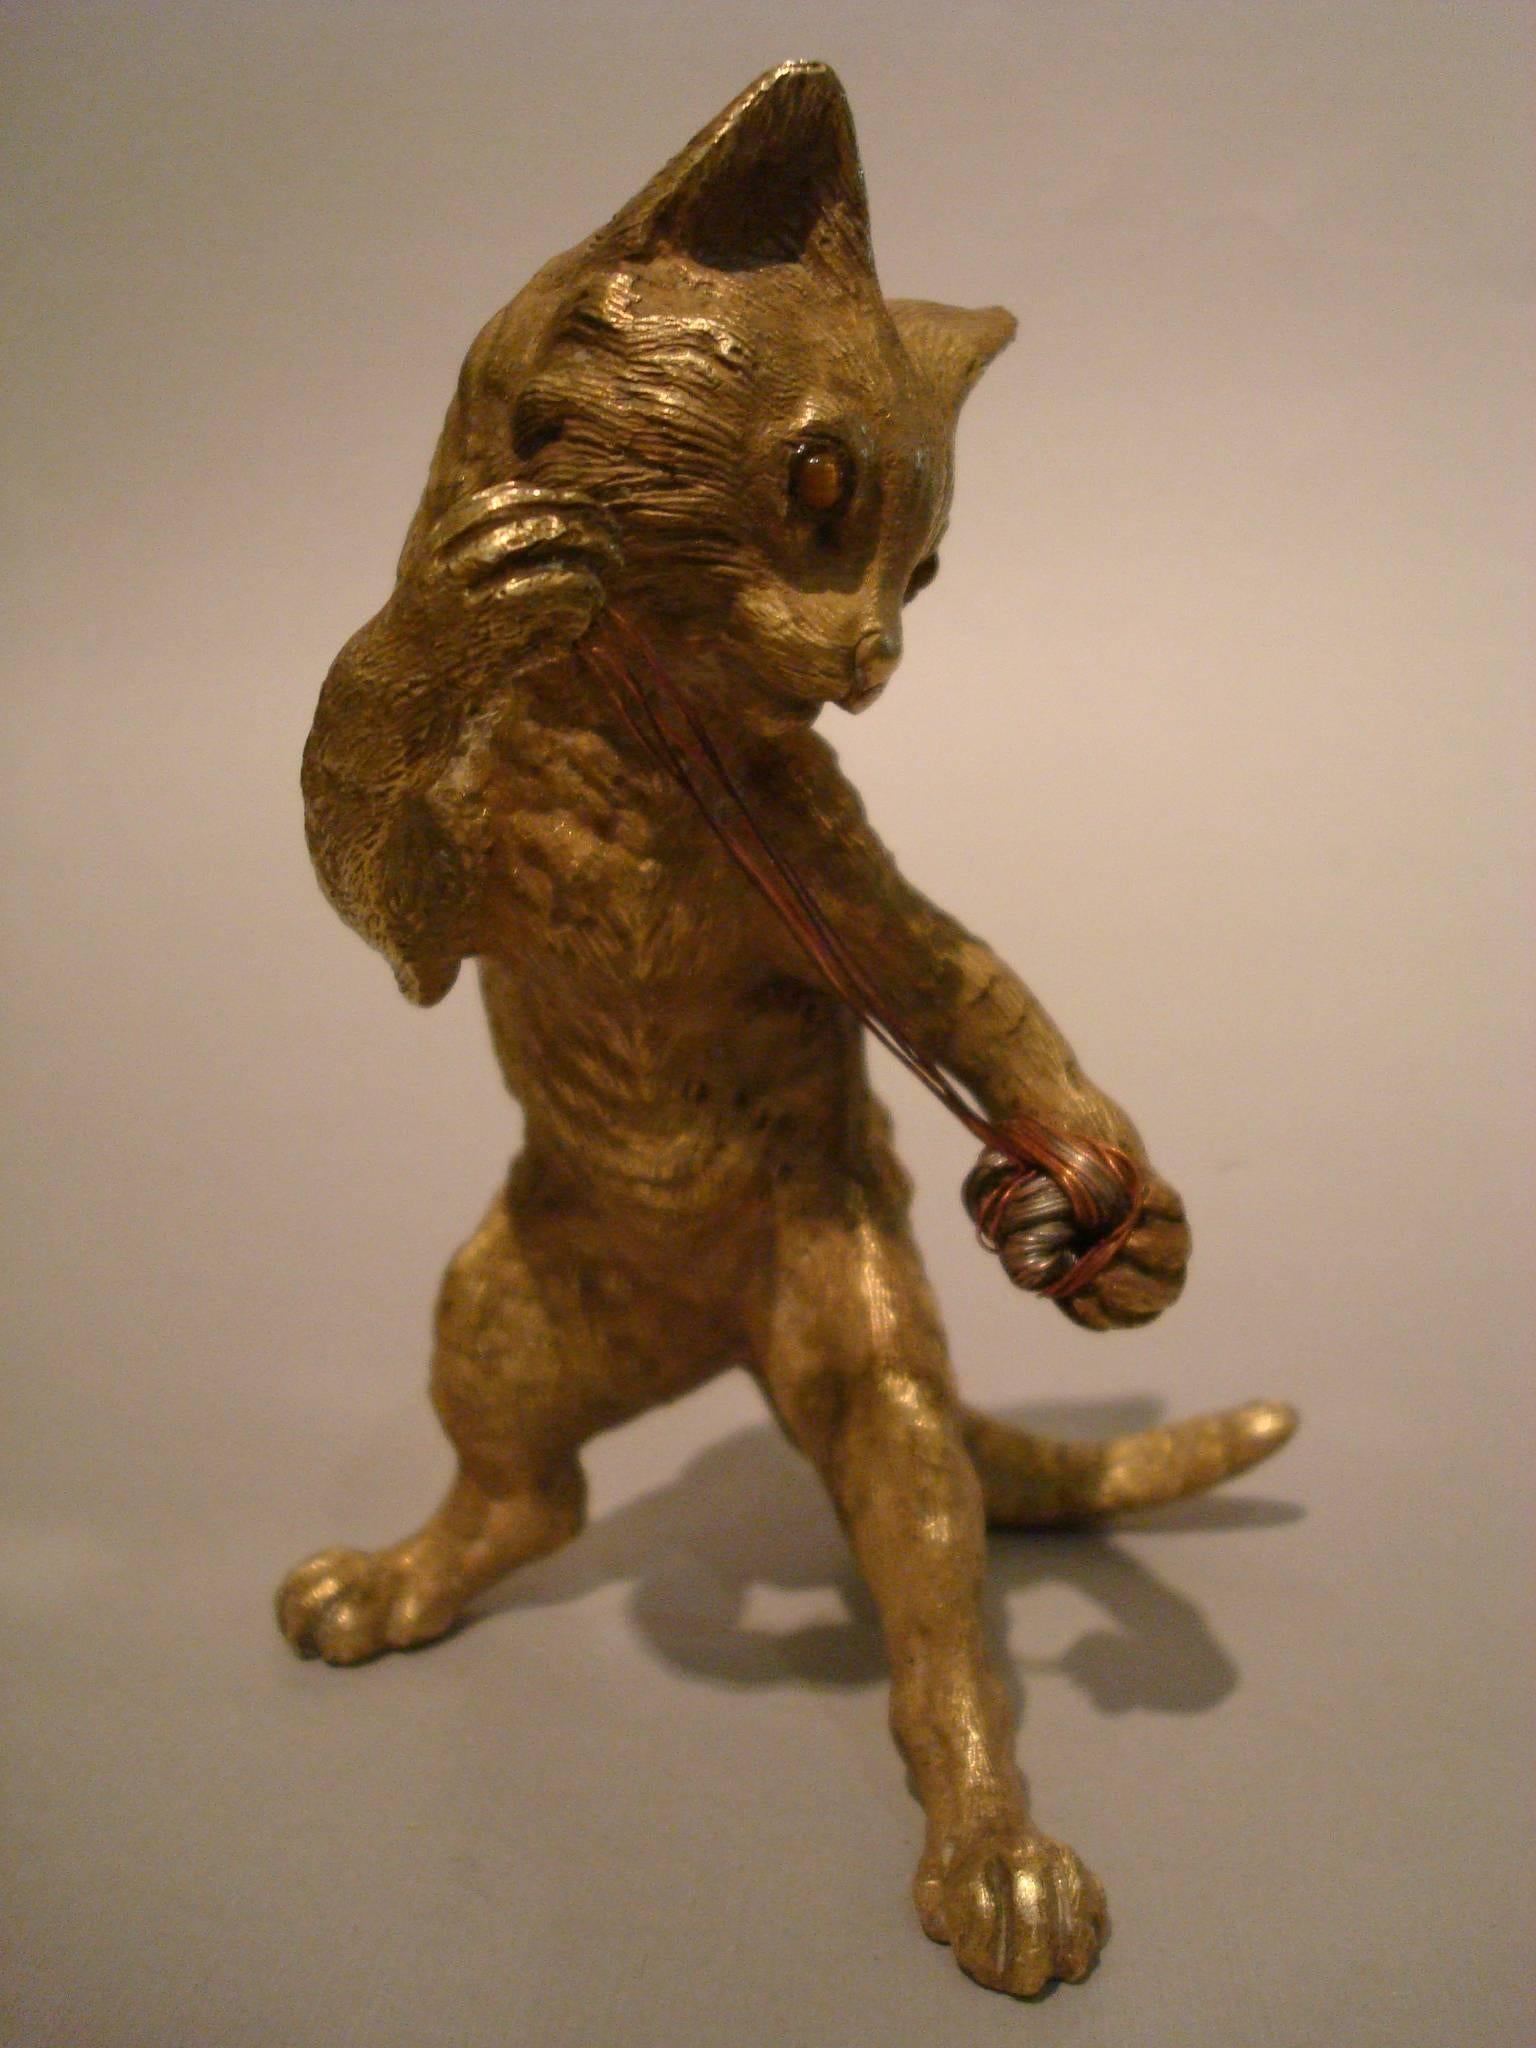 Early 20th Century Austrian Vienna Gilt Bronze Figurine of a Cat Playing with a Ball of Wool